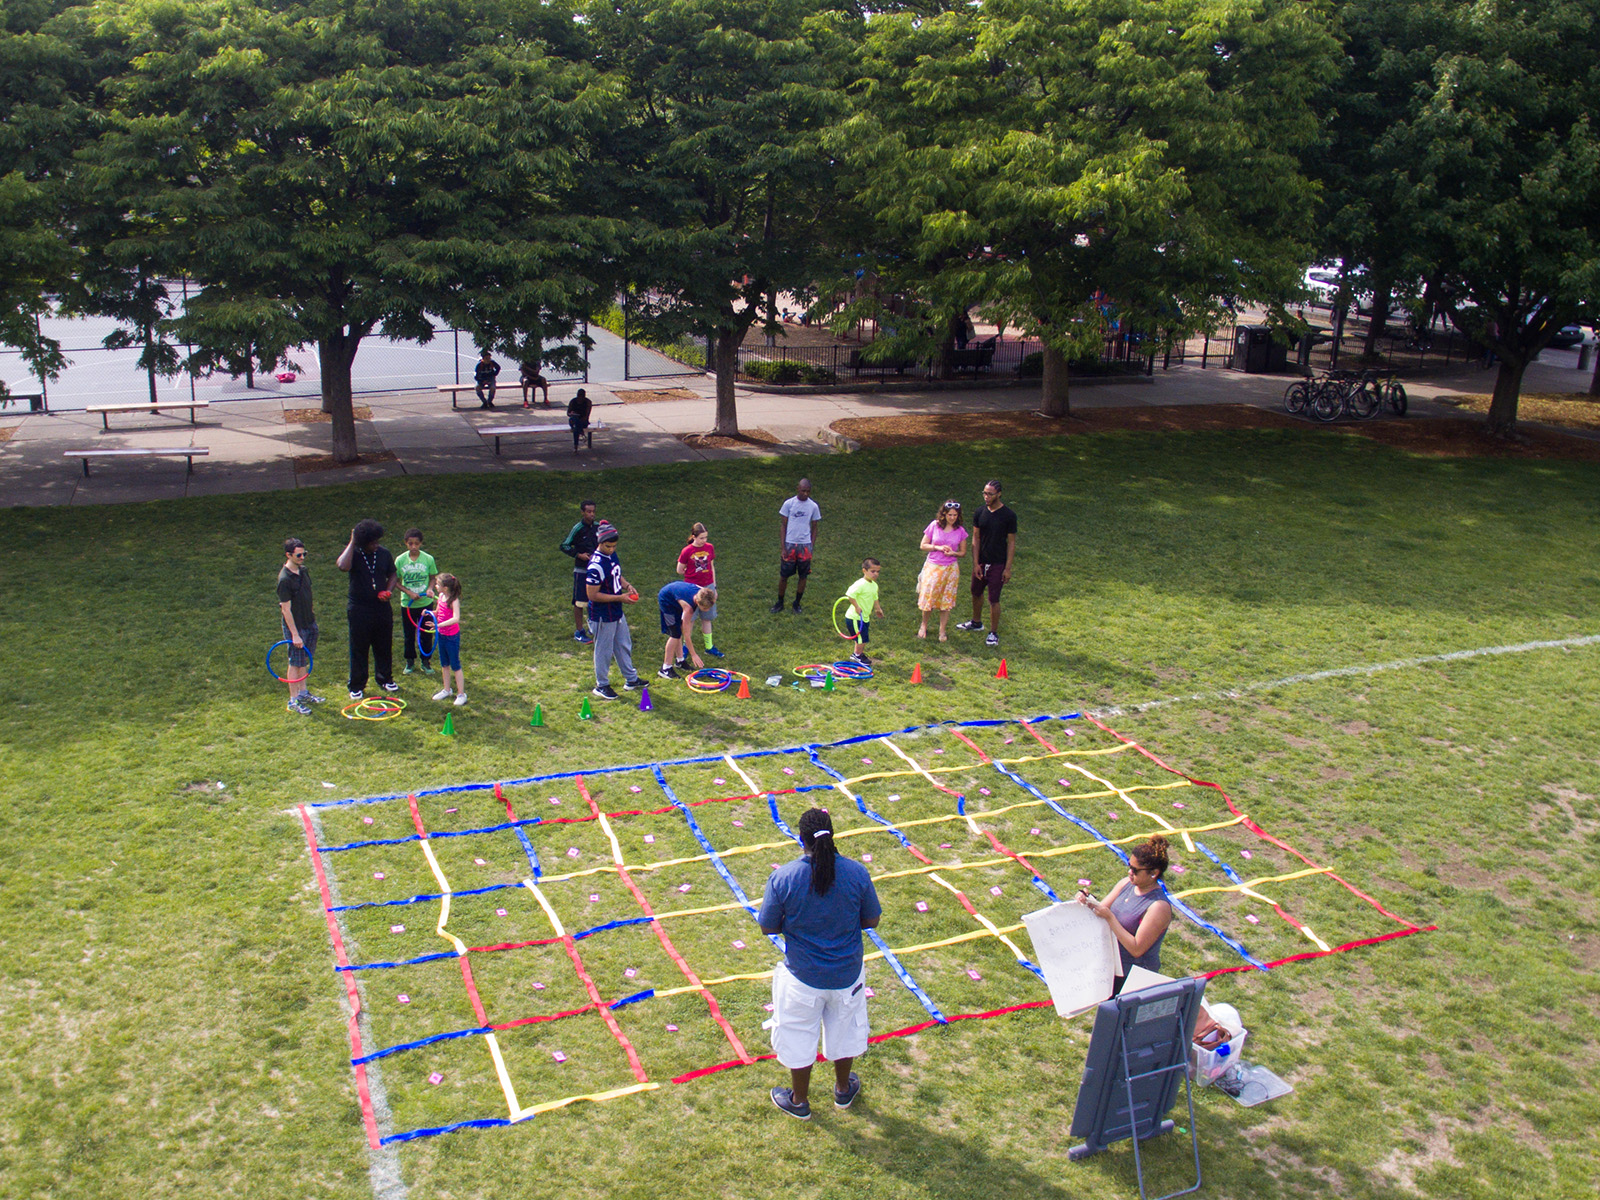 Families playing outdoor games